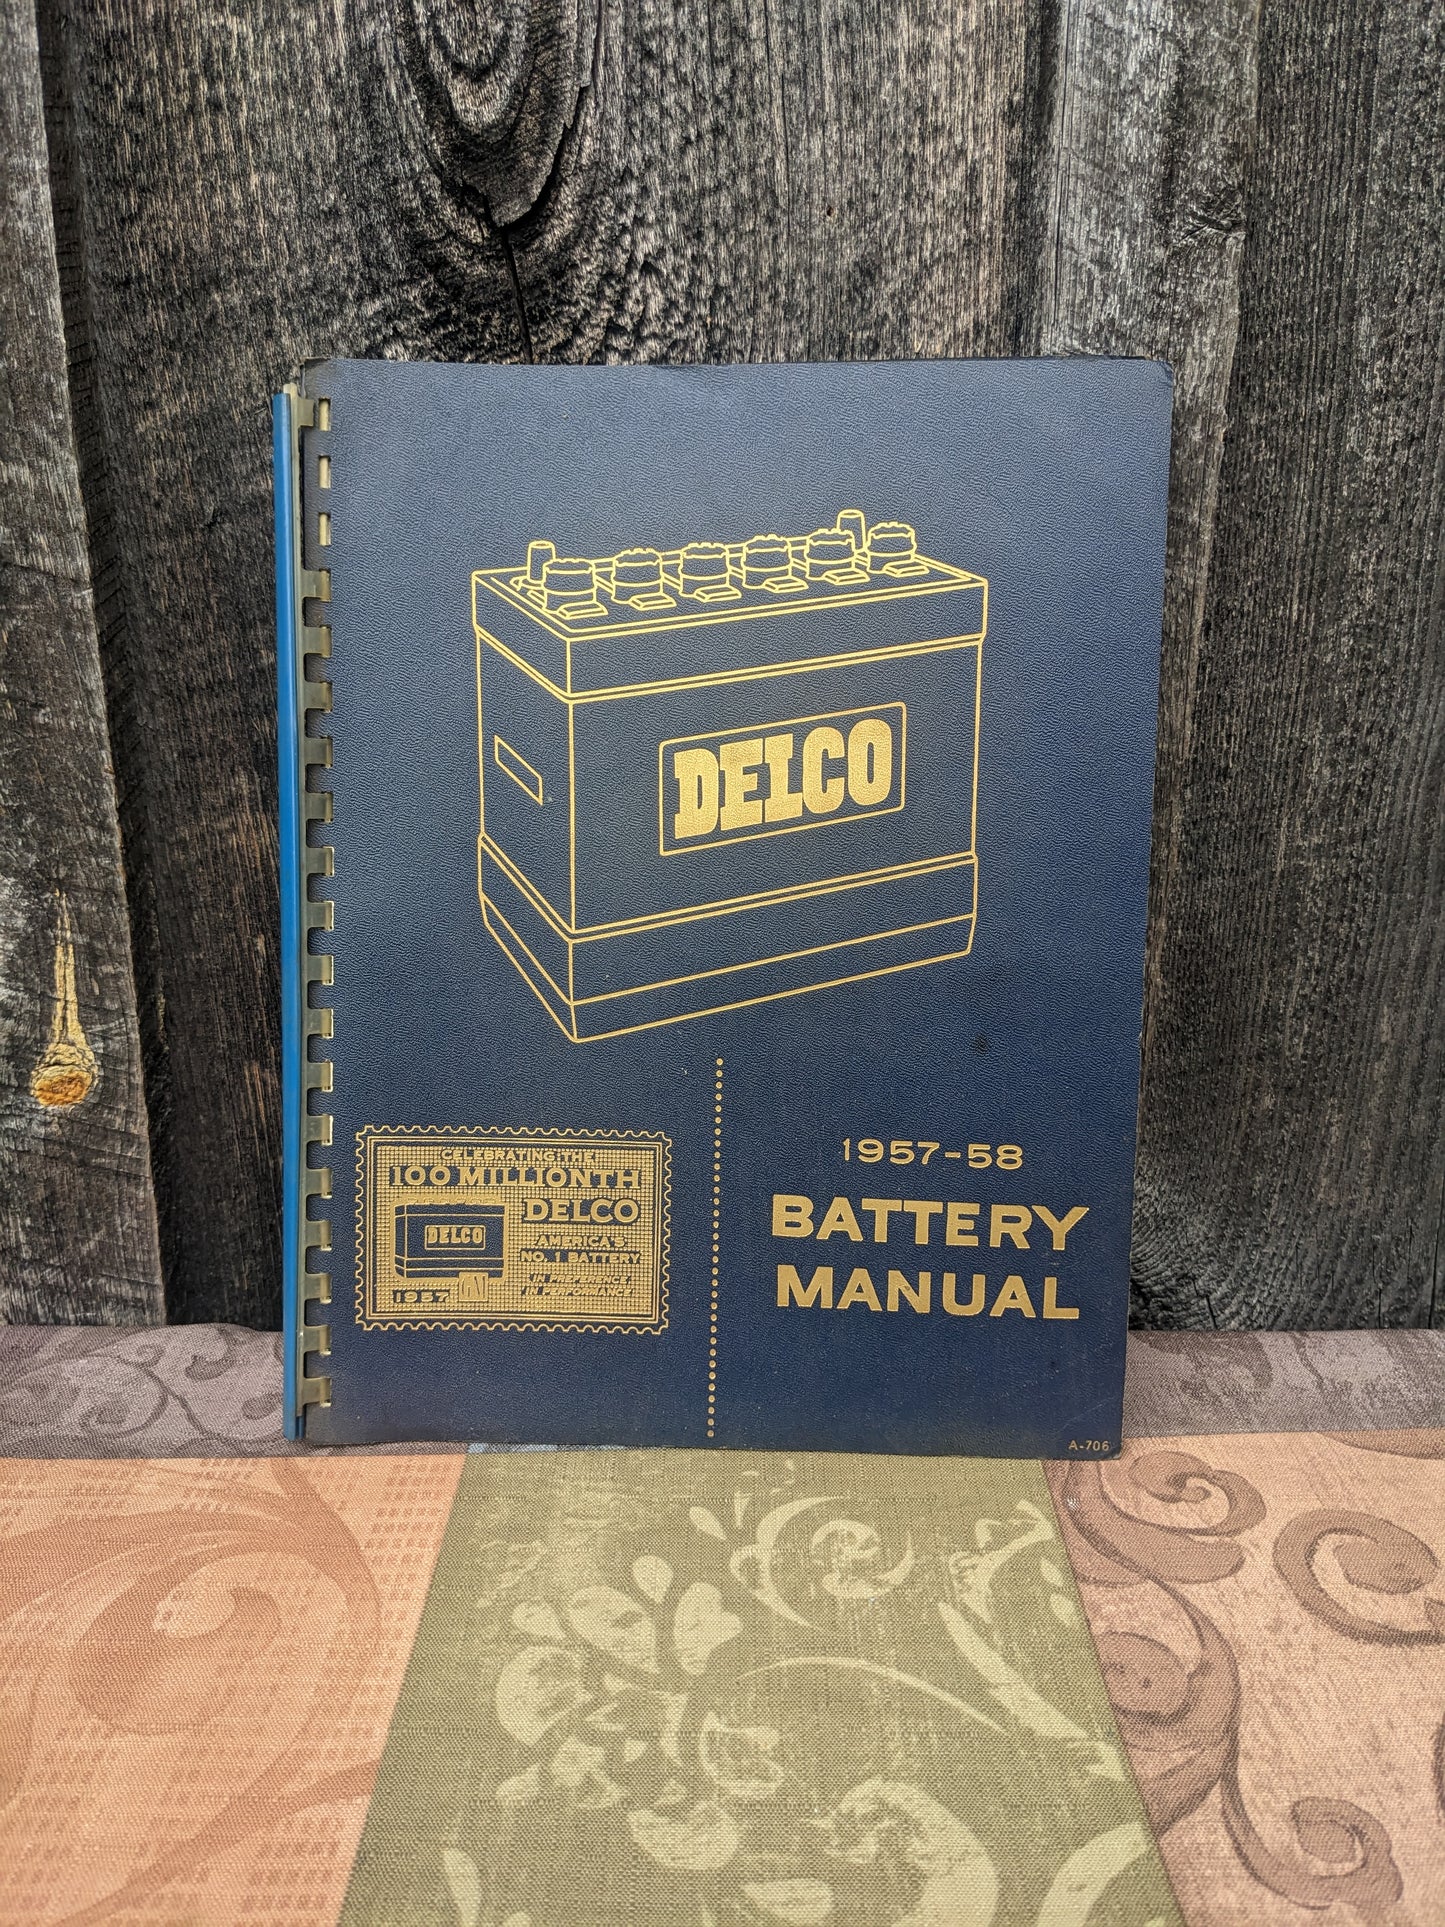 Vintage Delco Battery Dealer Manual and Poster, 1957-1958